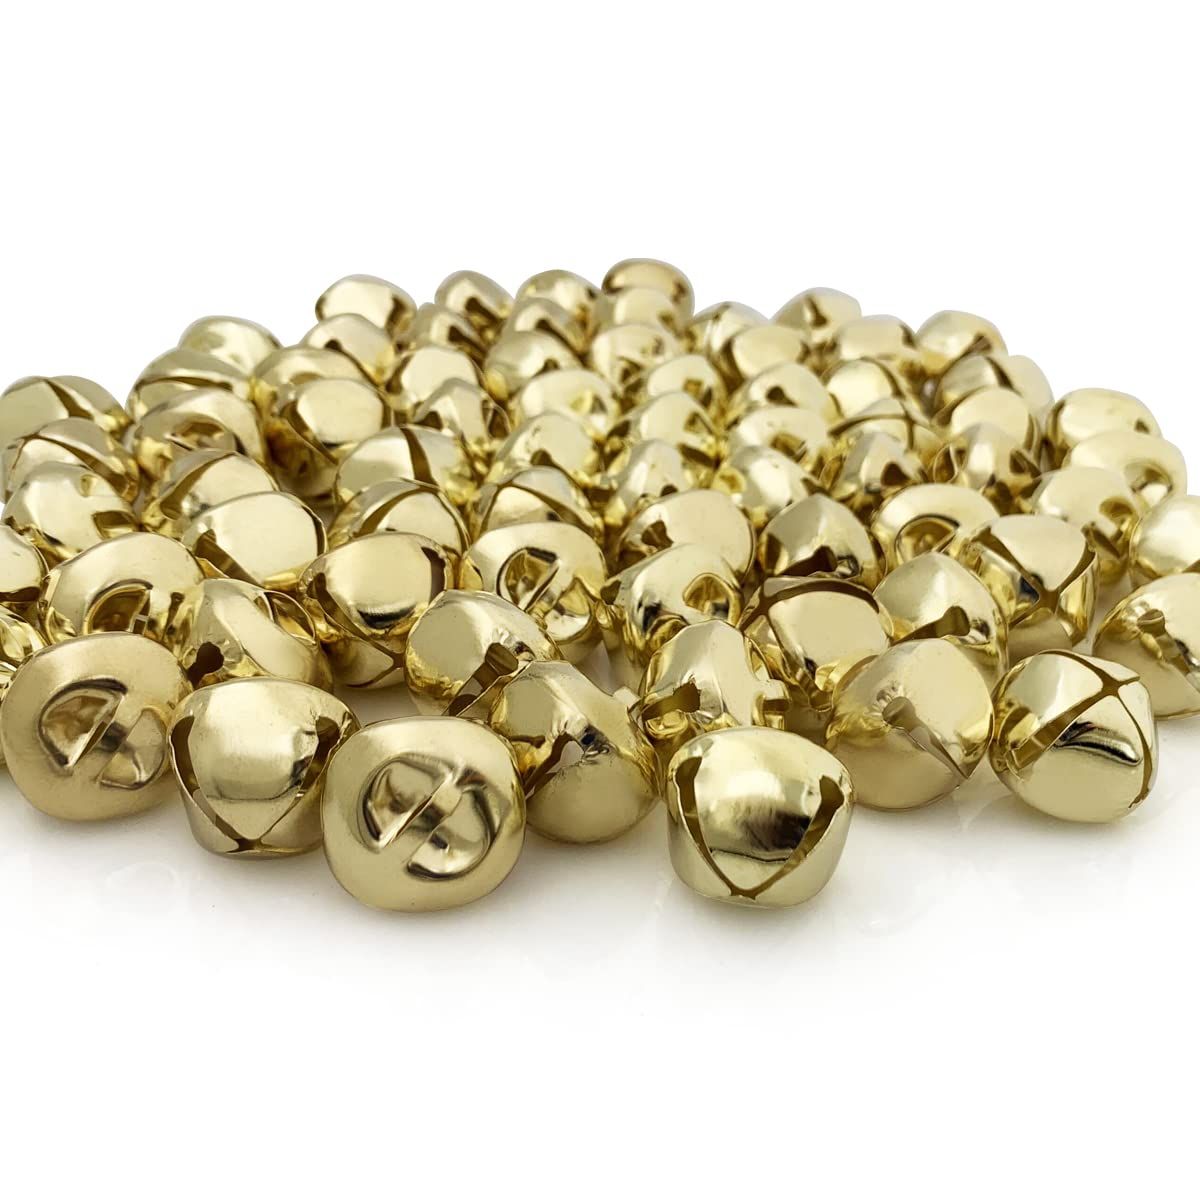 CLLOOTVE Jingle Bells 1-Inch/ 25mm Metal Craft Bells, for Holiday Home Christmas Festival Party Wedd | Amazon (US)